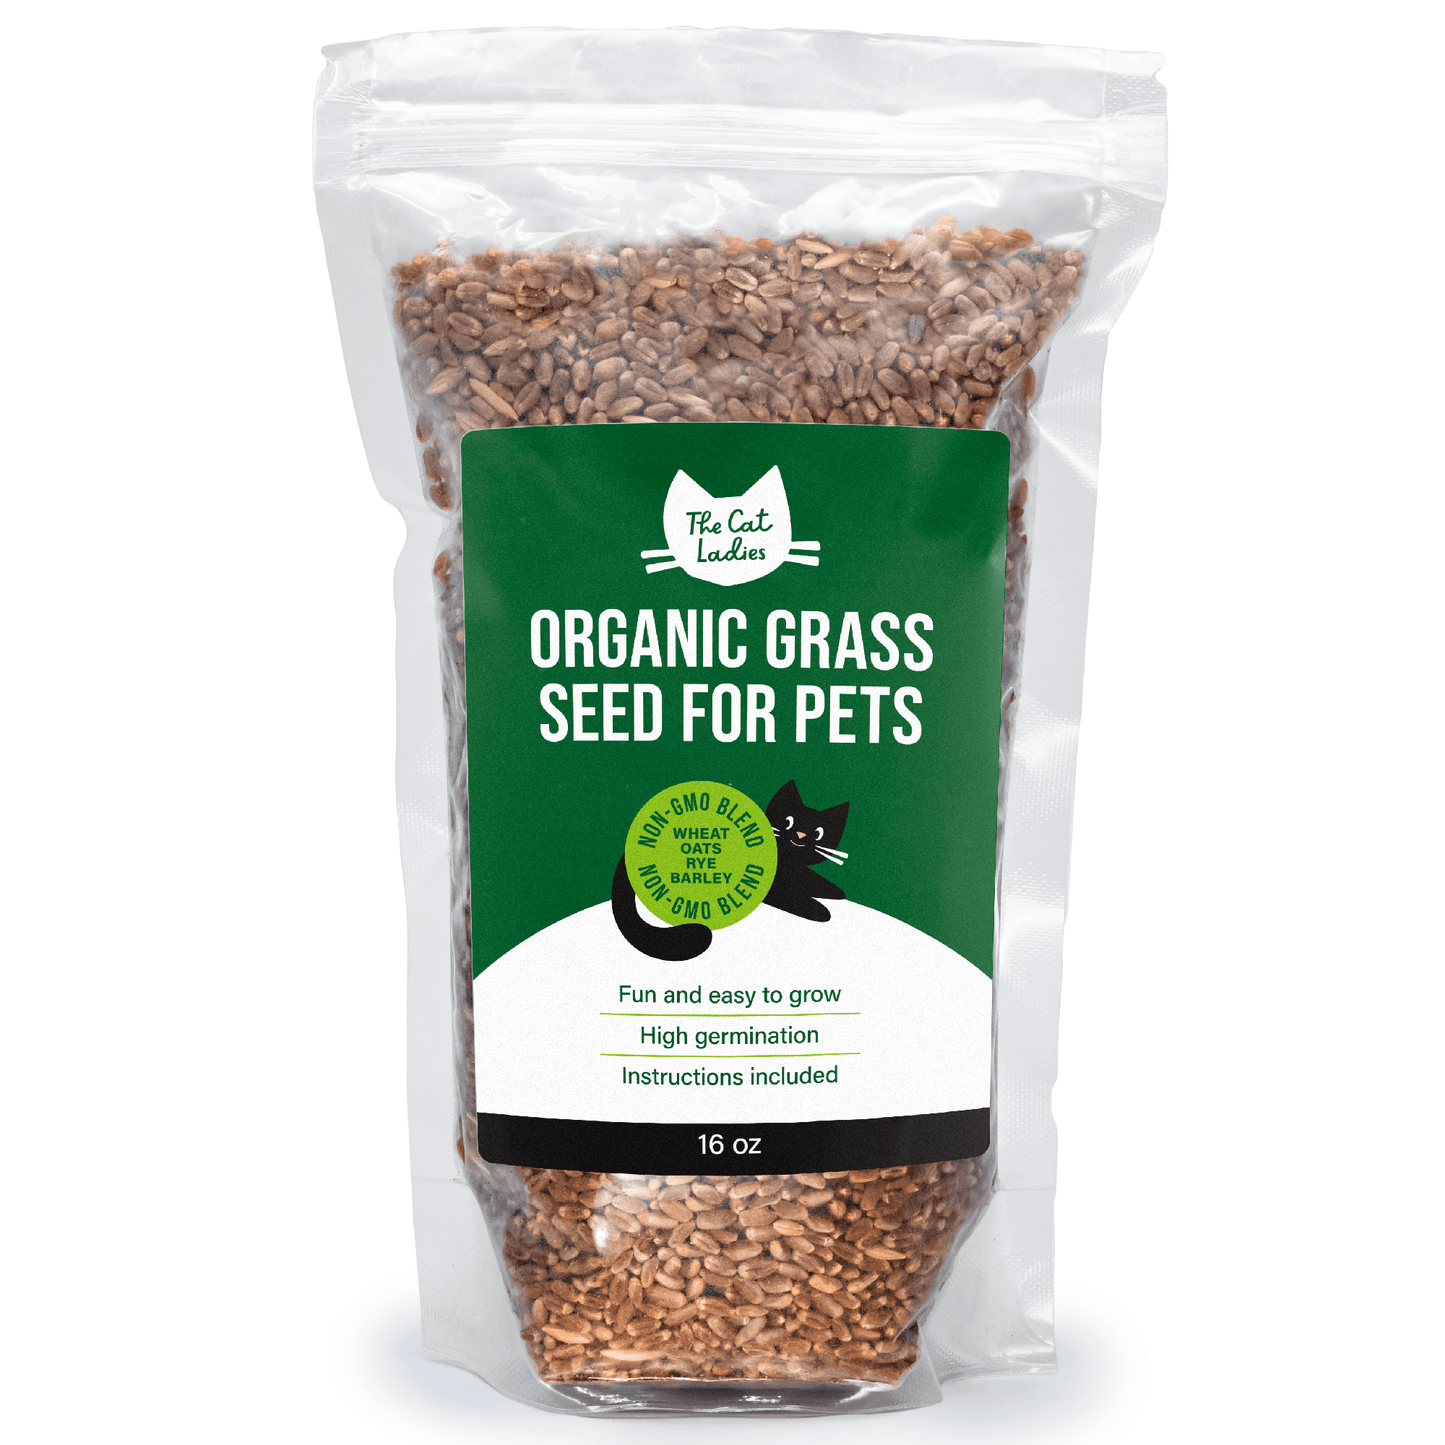 Organic grass seed for pets